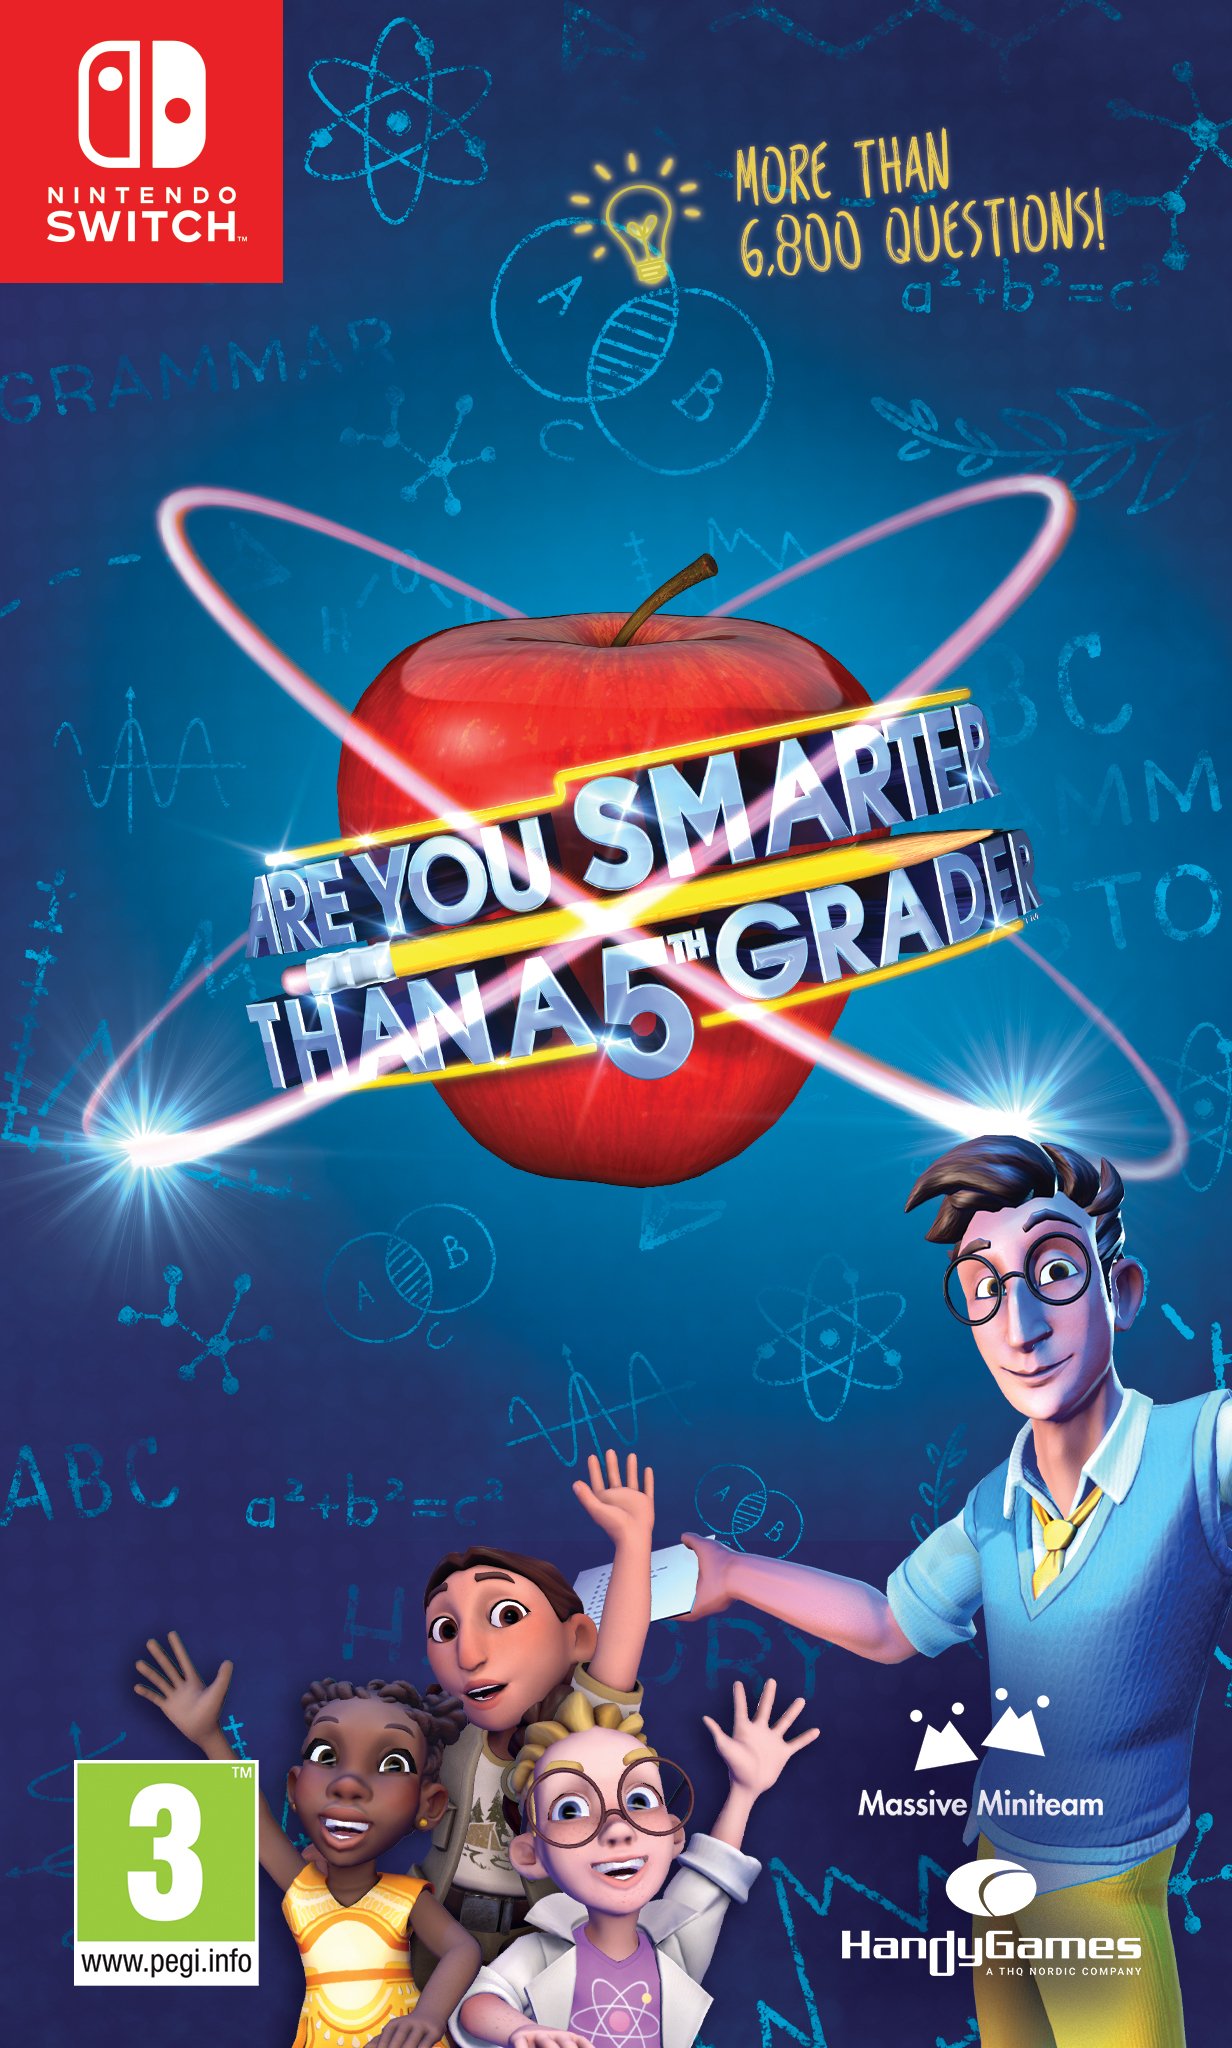 Are You Smarter Than A 5th Grader? von HandyGames